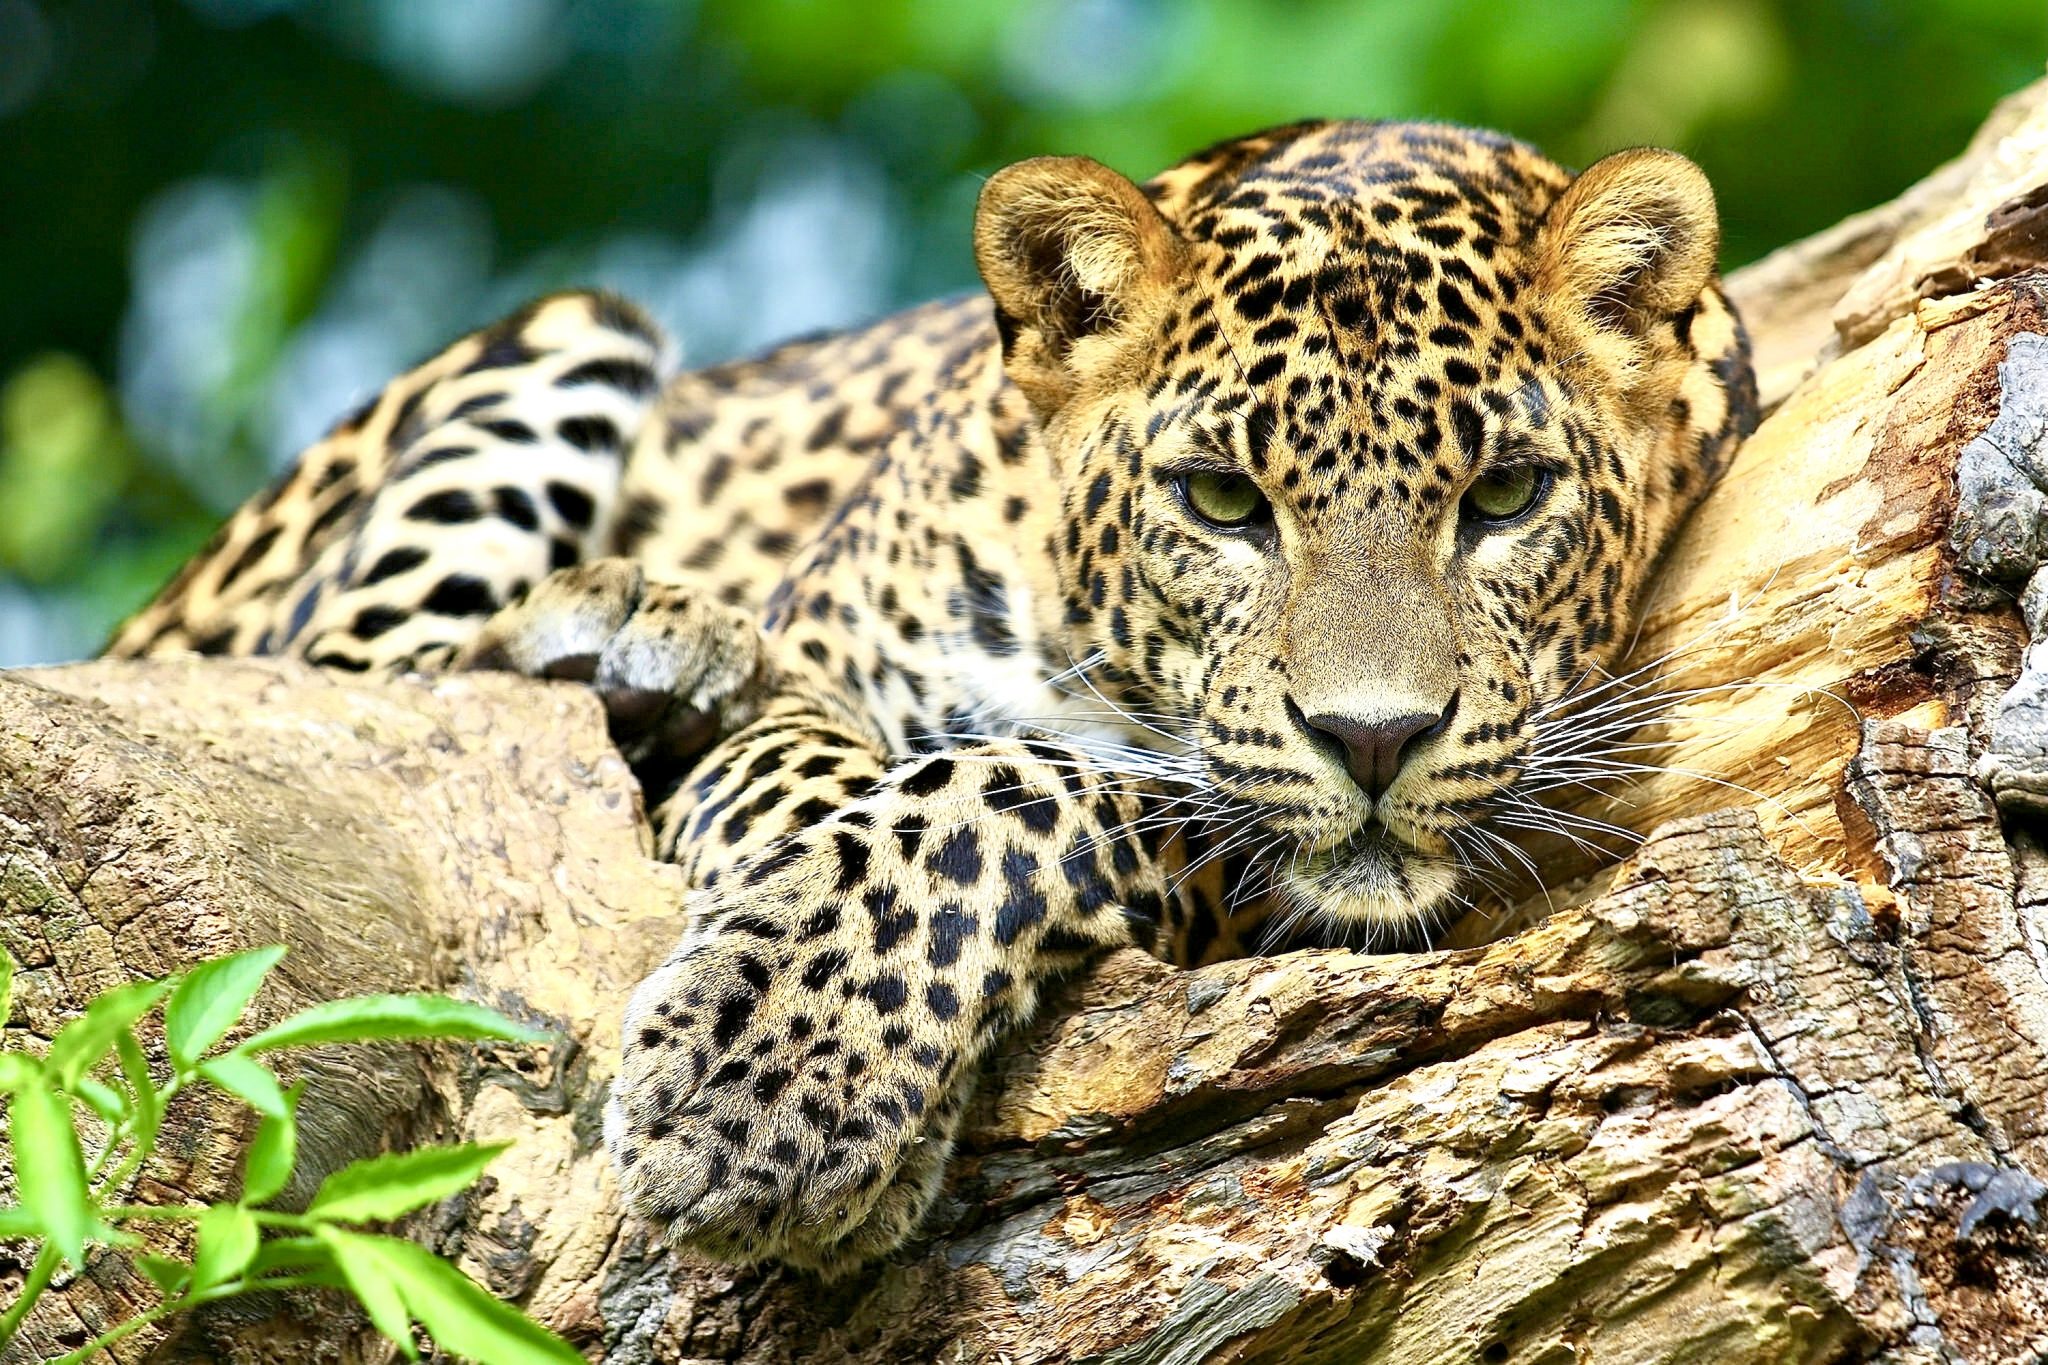 Scientists Say It's Time To Reintroduce Jaguars Back Into The U.S